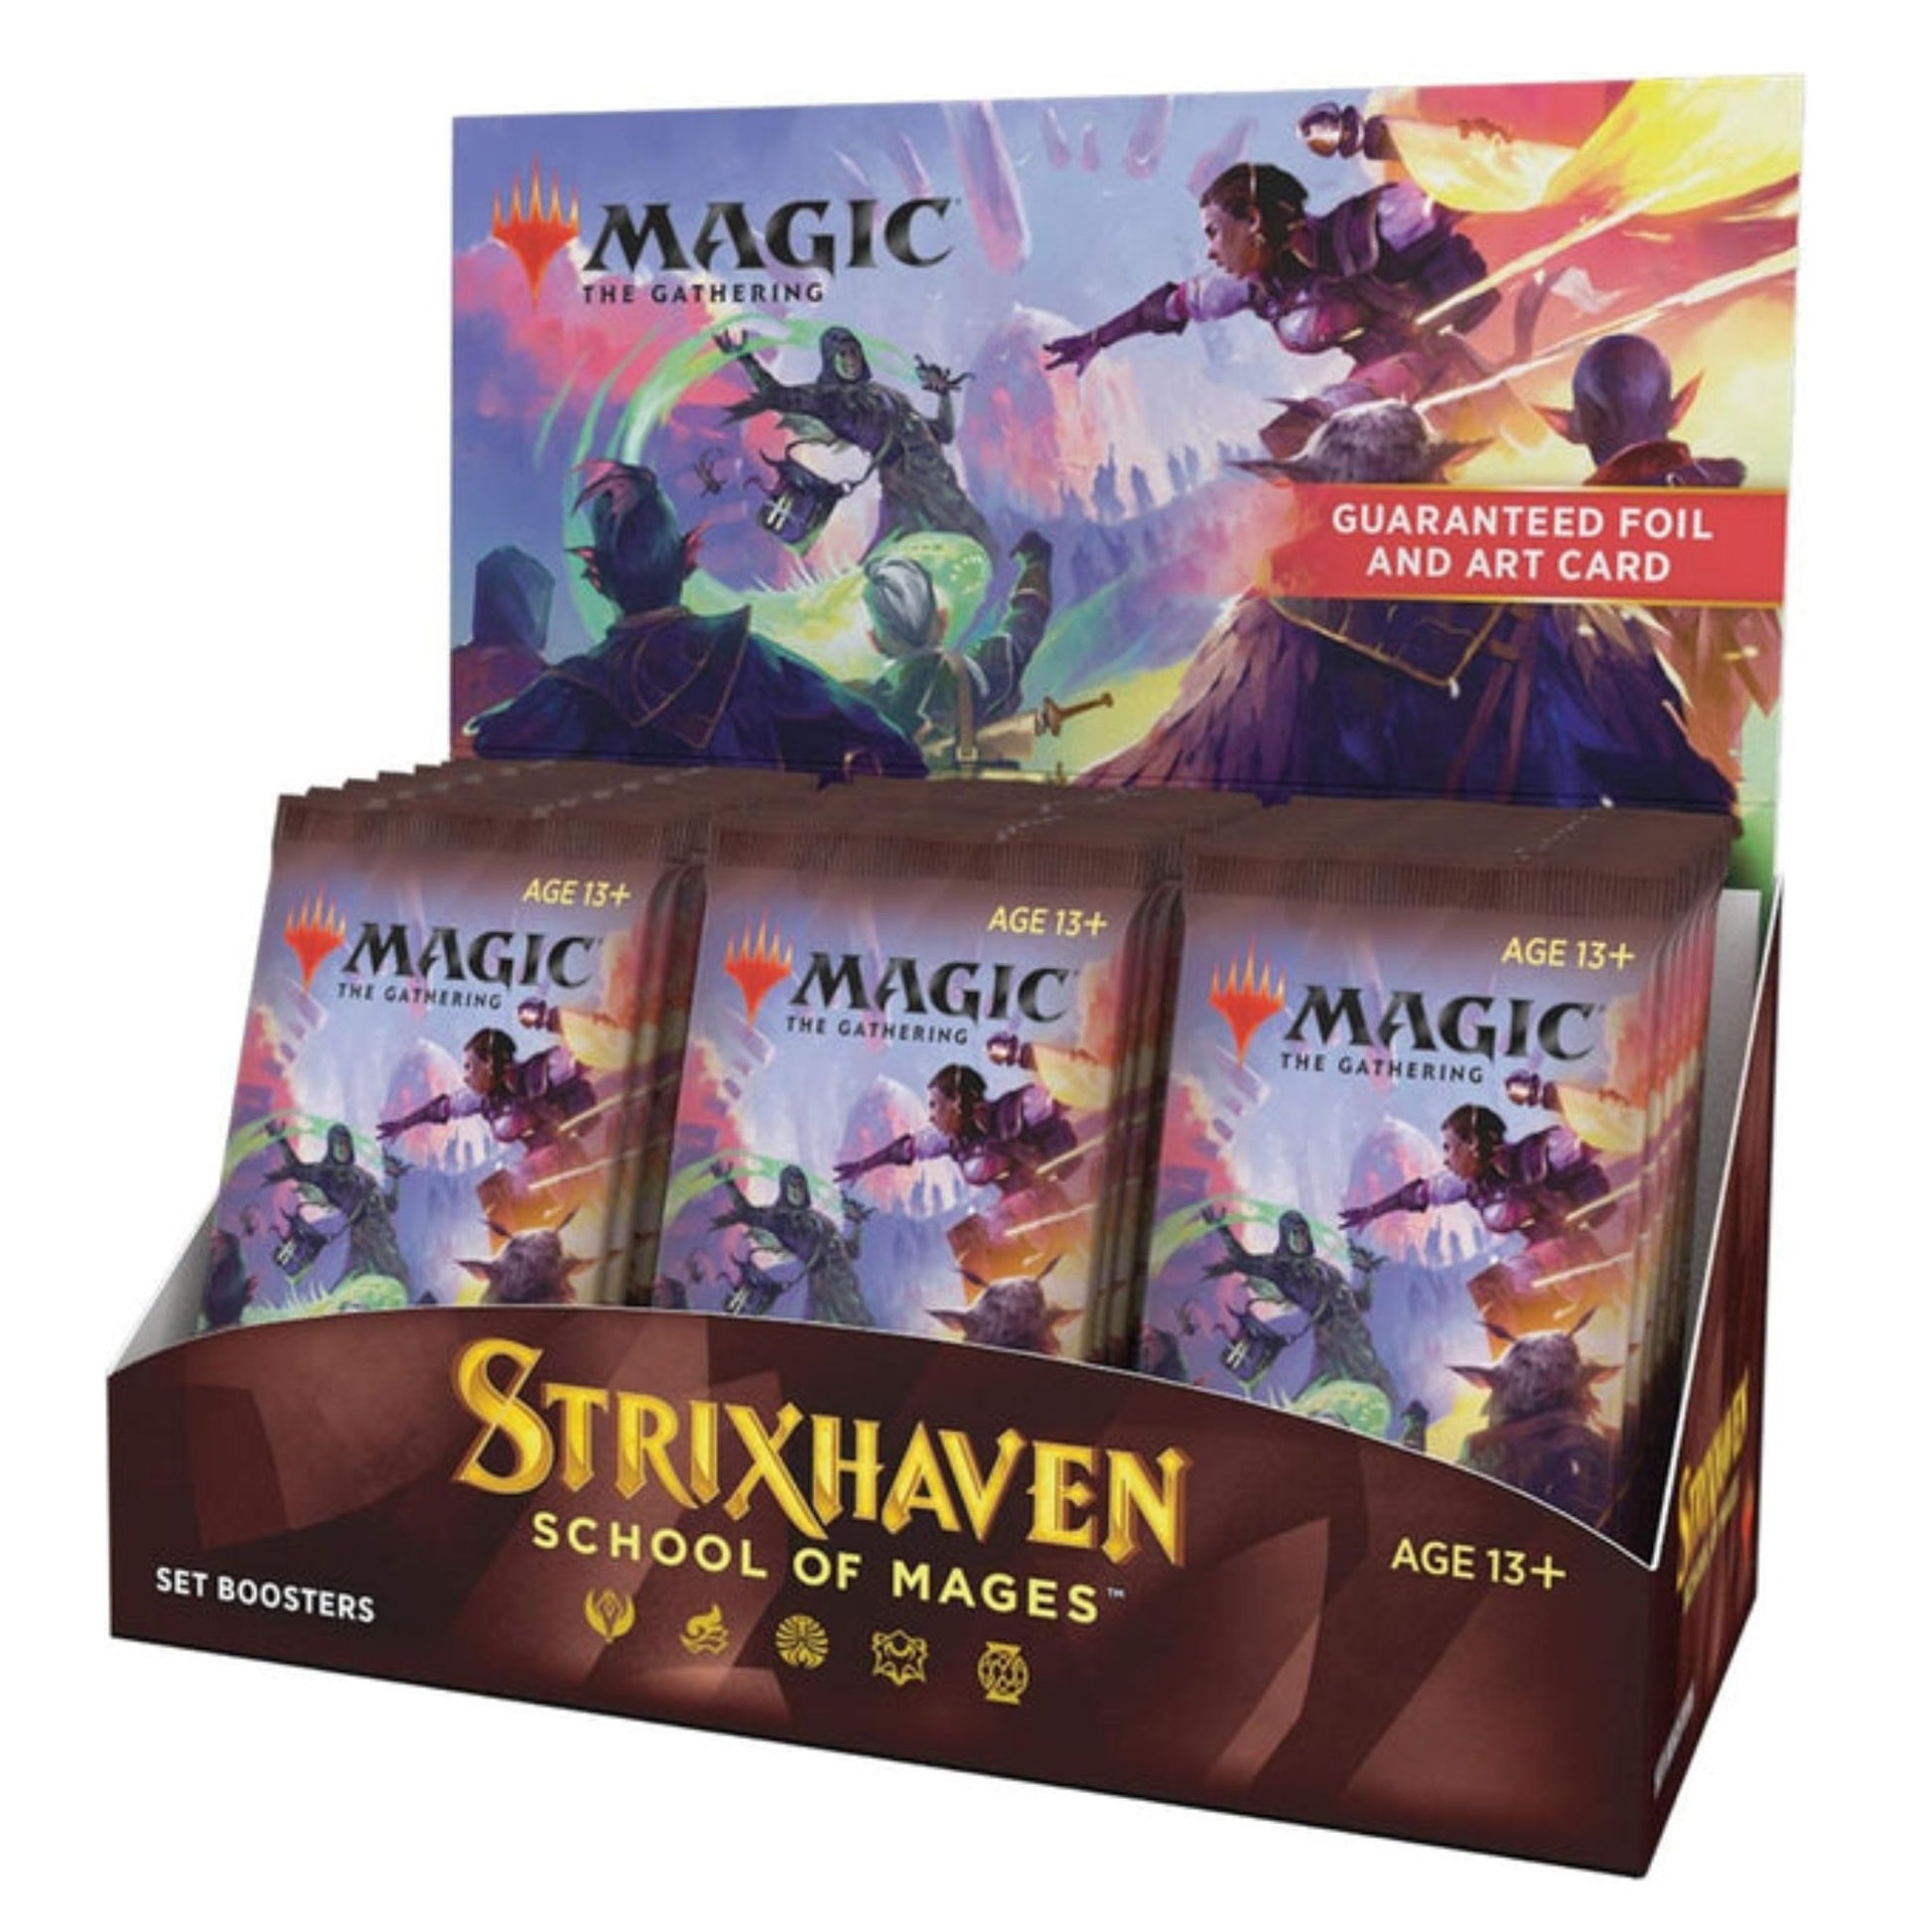 Magic The Gathering Strixhaven School of Mages Set Booster Box